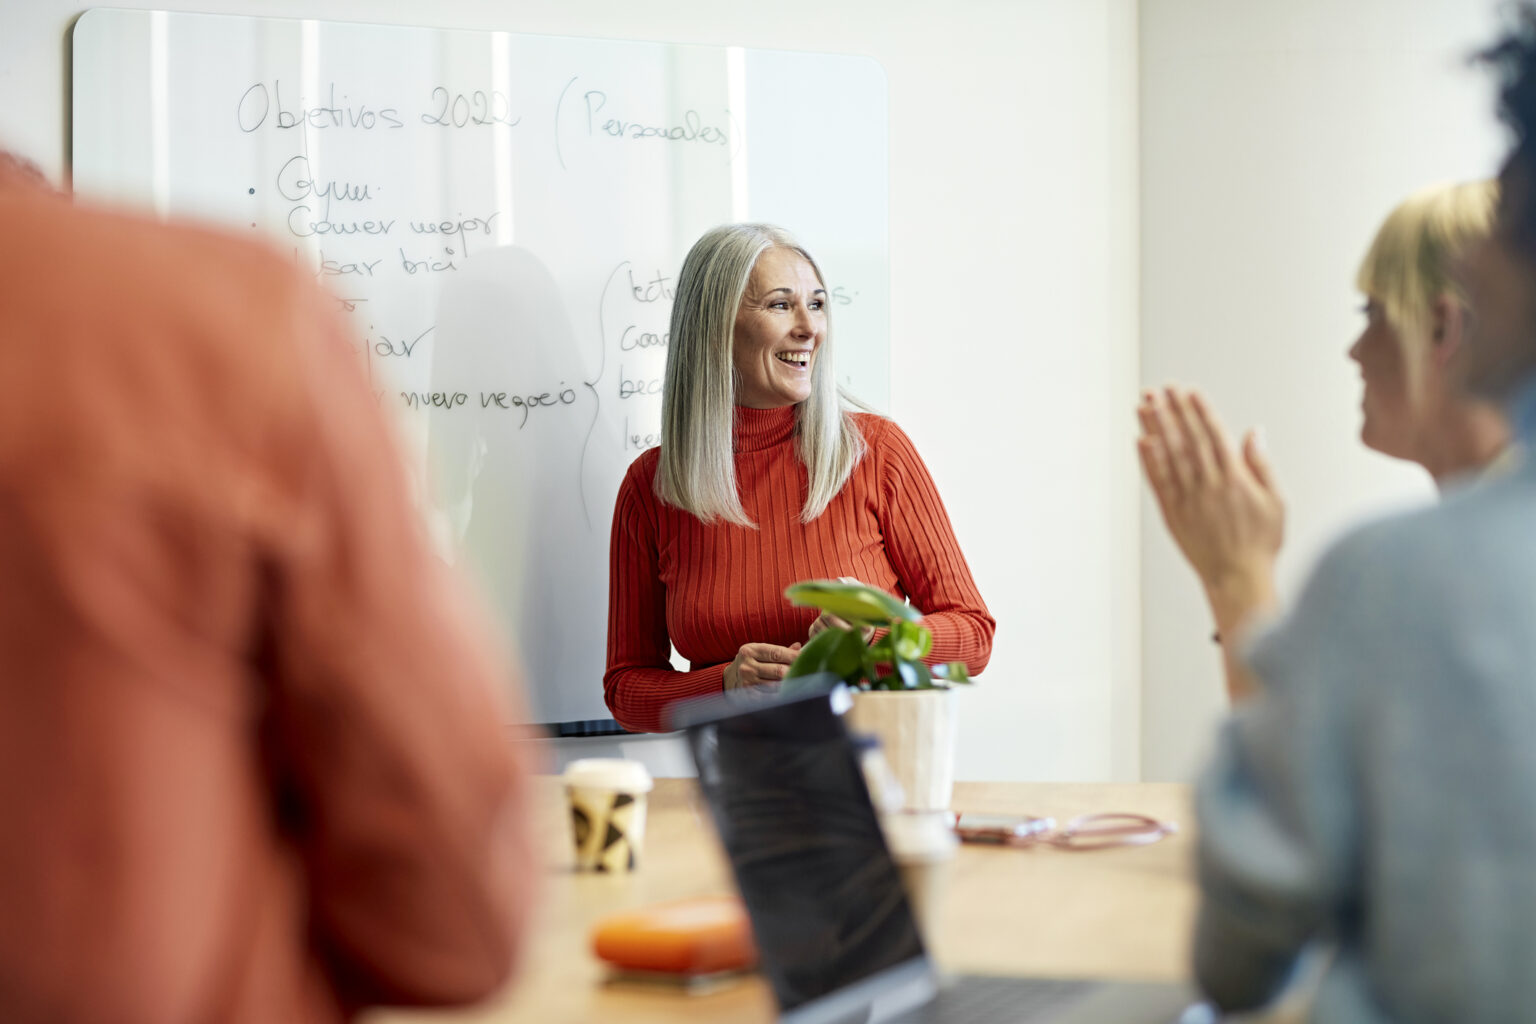 Woman receives applause from colleagues for her ideas at informal meeting.